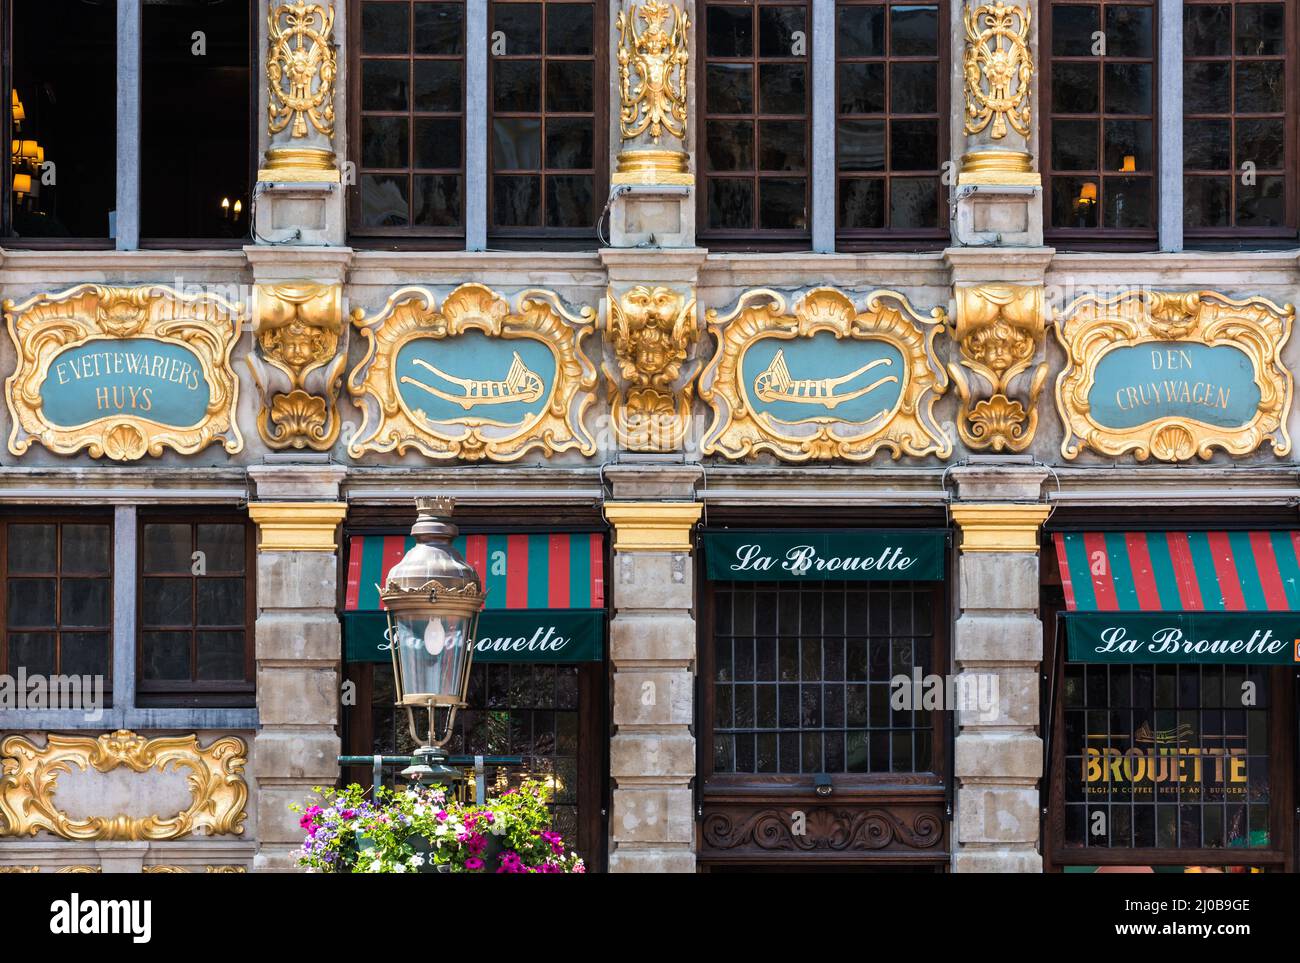 Brussels Old Town , Belgium - 07 05 2019- Facade of the restaurant and ...